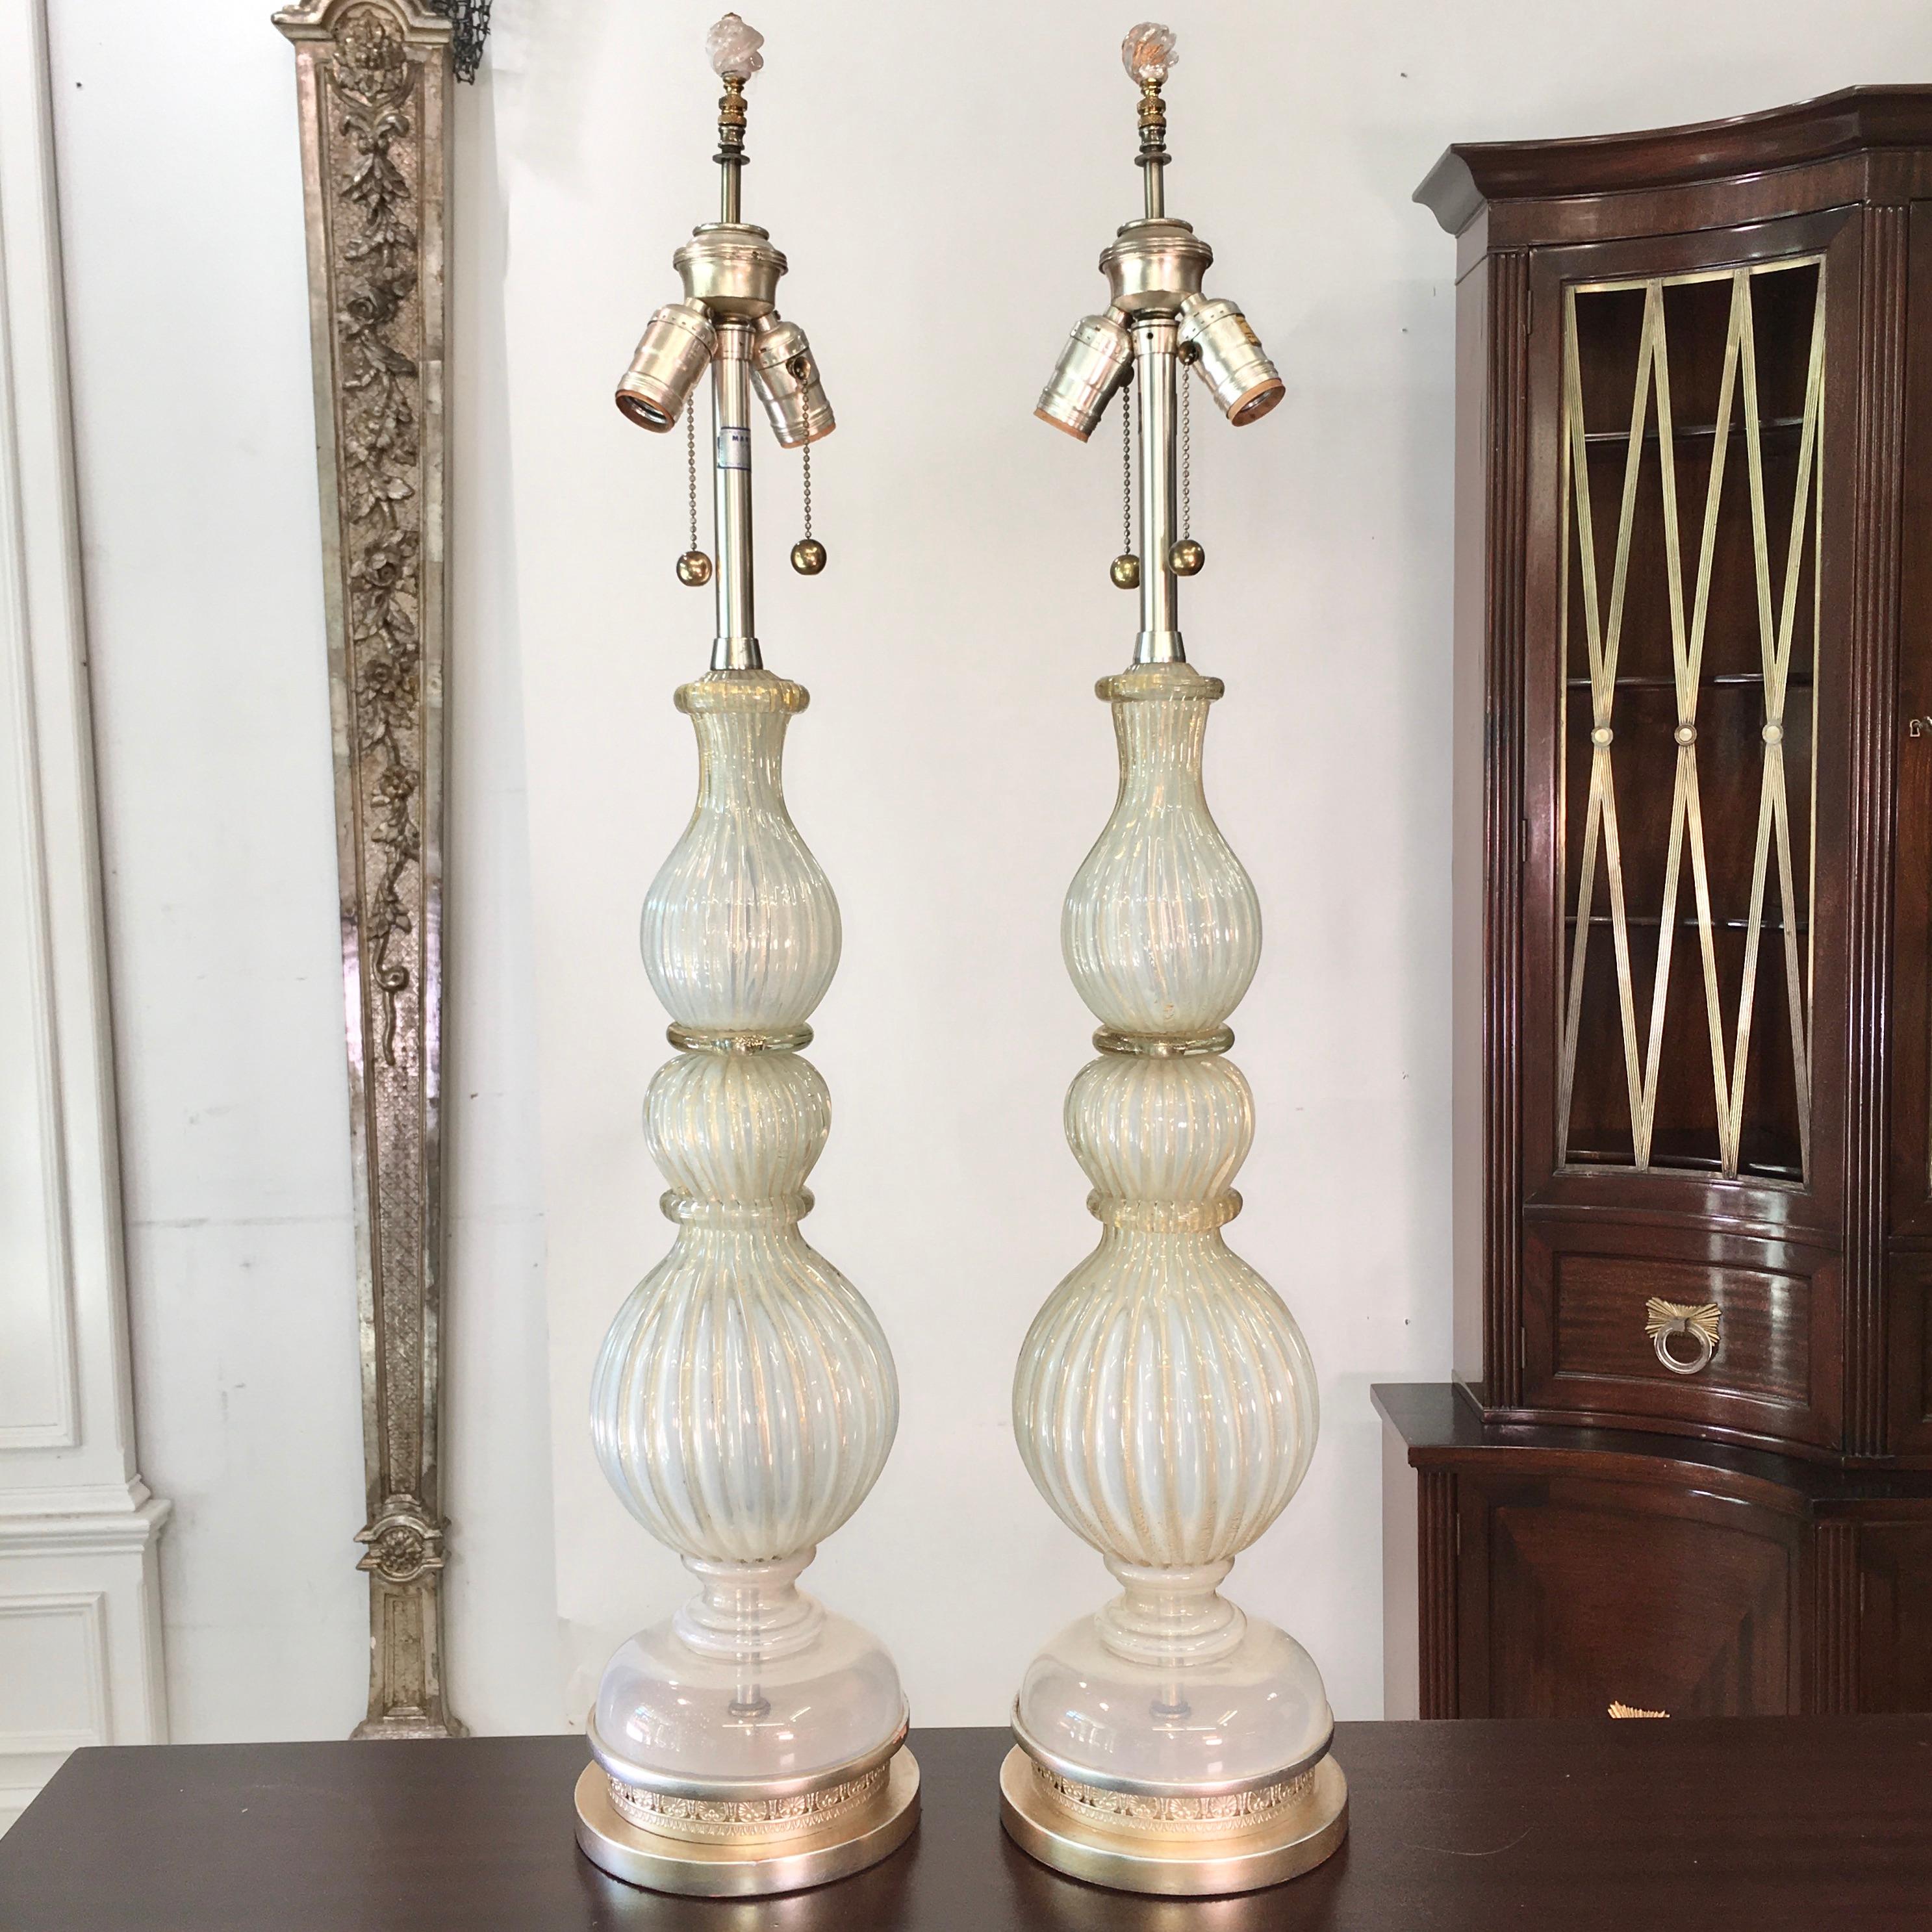 Pair of original grand scale Murano glass table lamps by Archimede Seguso imported by The Marbro Lamp Co., circa 1960. Both lamps signed.
Ribbed opalescent silvery white glass with flecks of gold. Bases have been platinum leafed with a gold